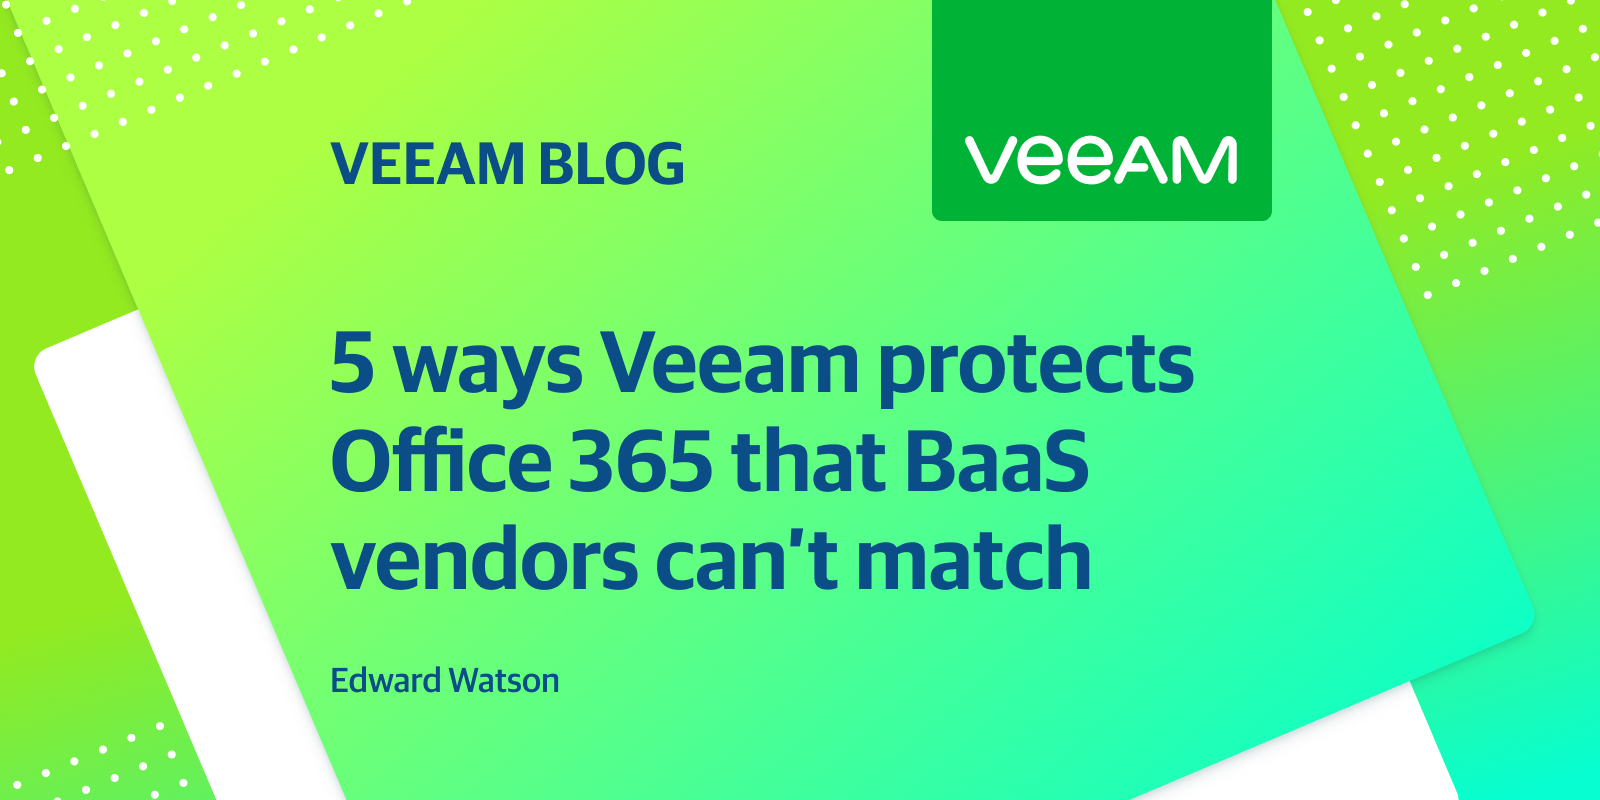 5 ways Veeam shields Office 365 that BaaS vendors can’t match